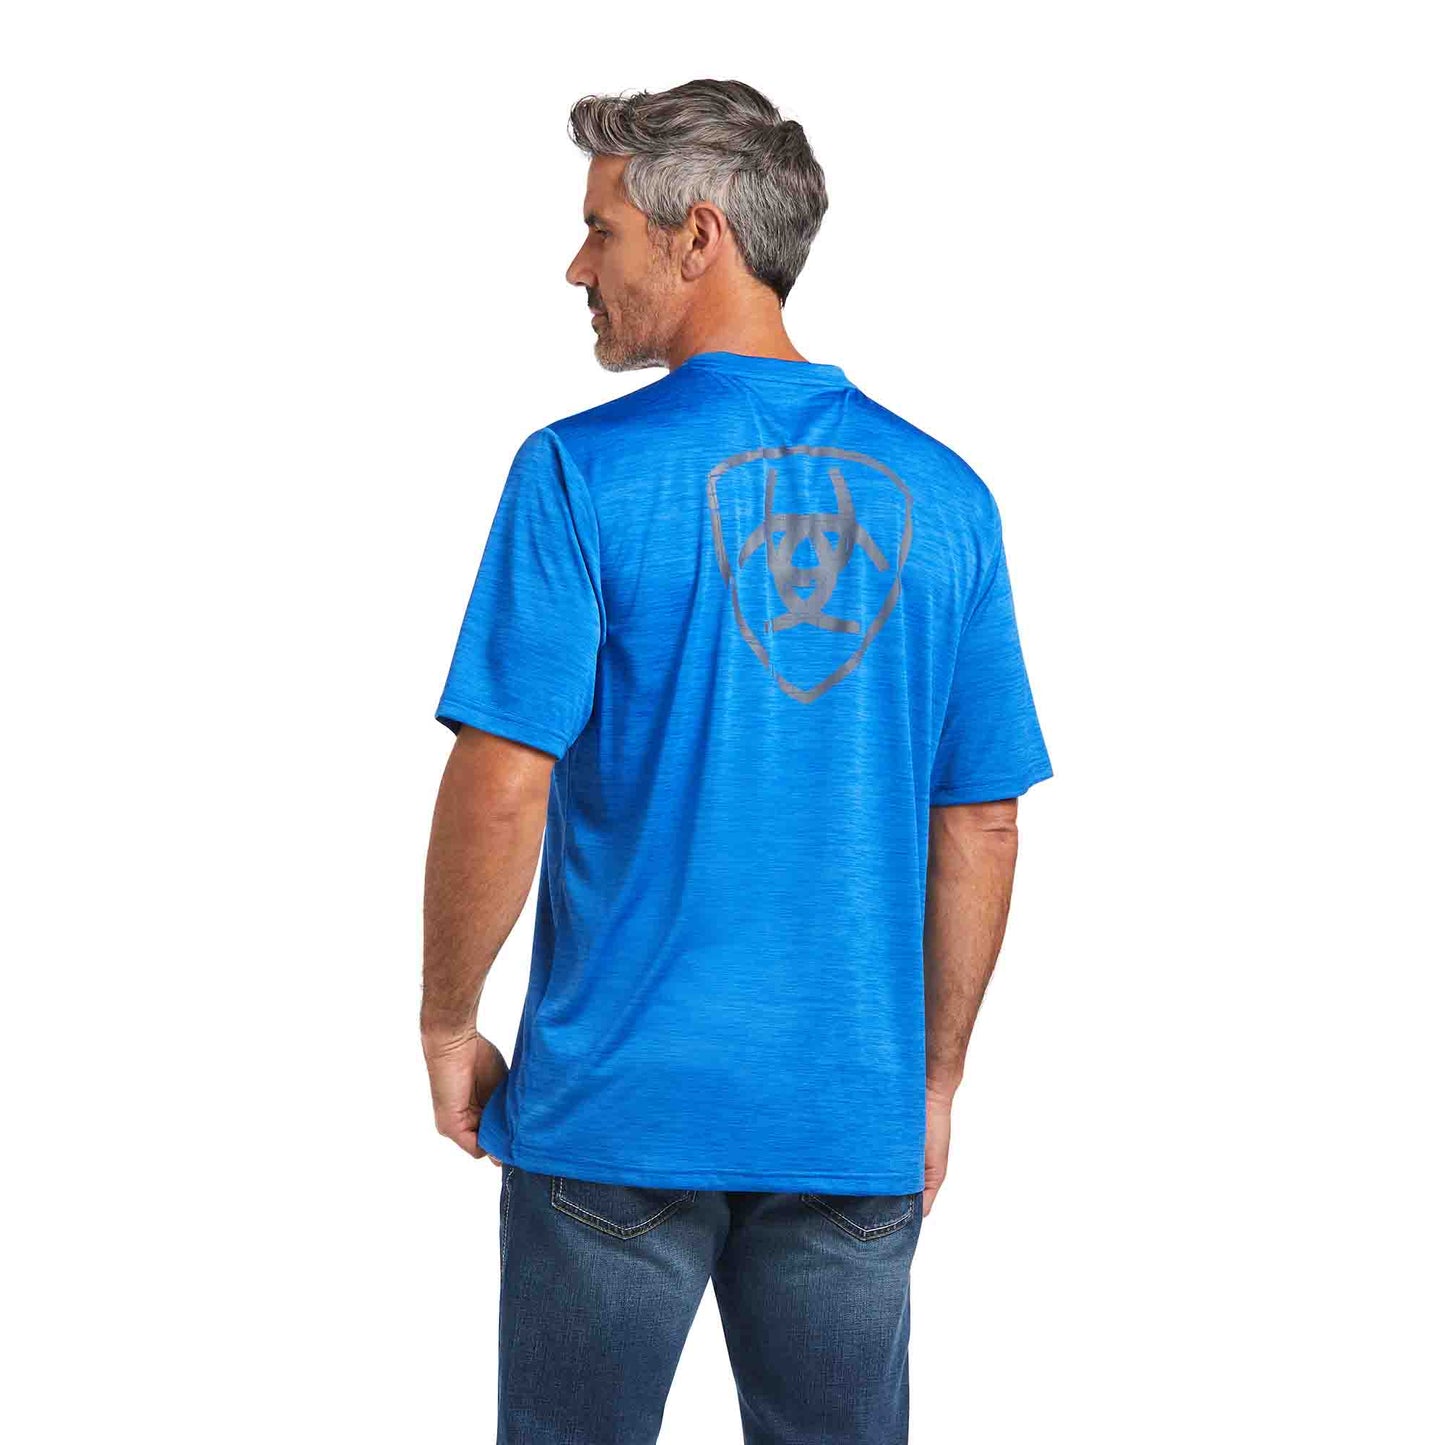 Ariat Mens Charger Tee Ver Flag